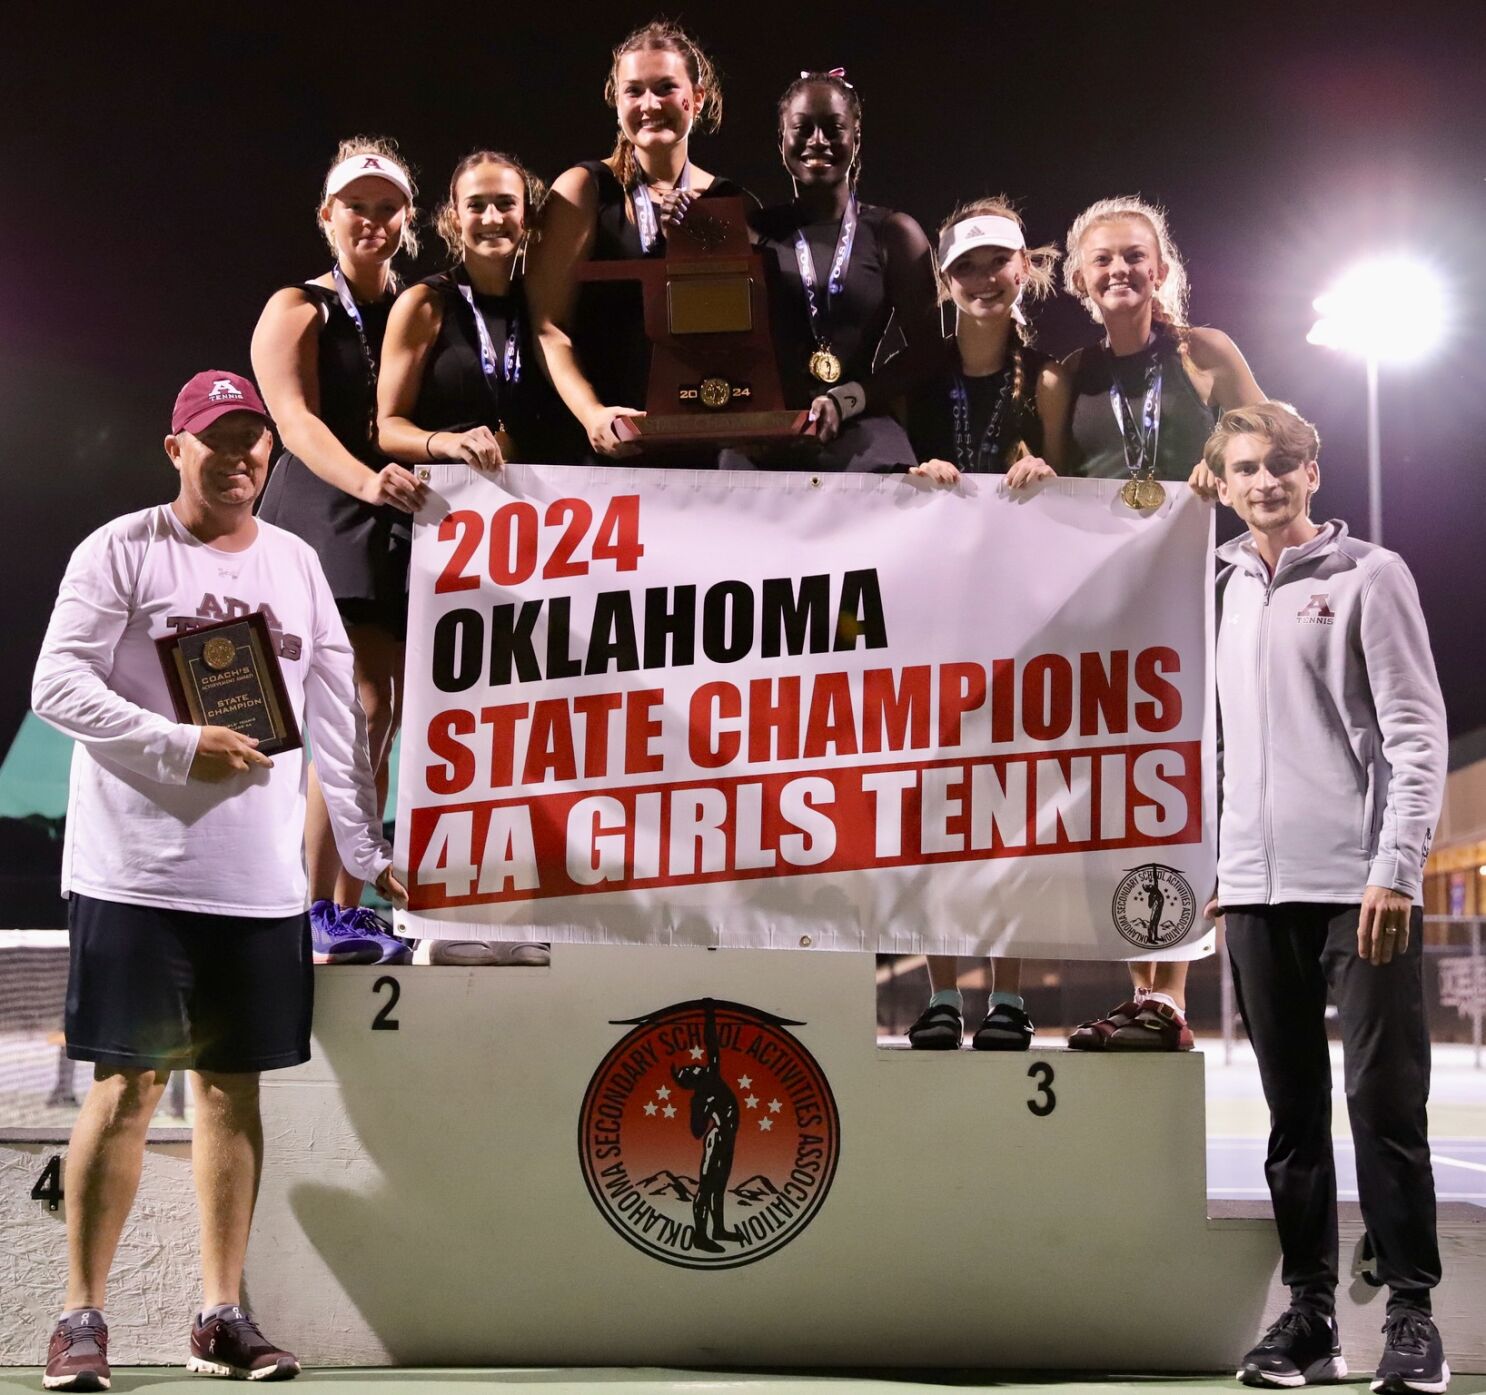 Ada High School Lady Cougars Claim Victory in 4A State Tennis Championship